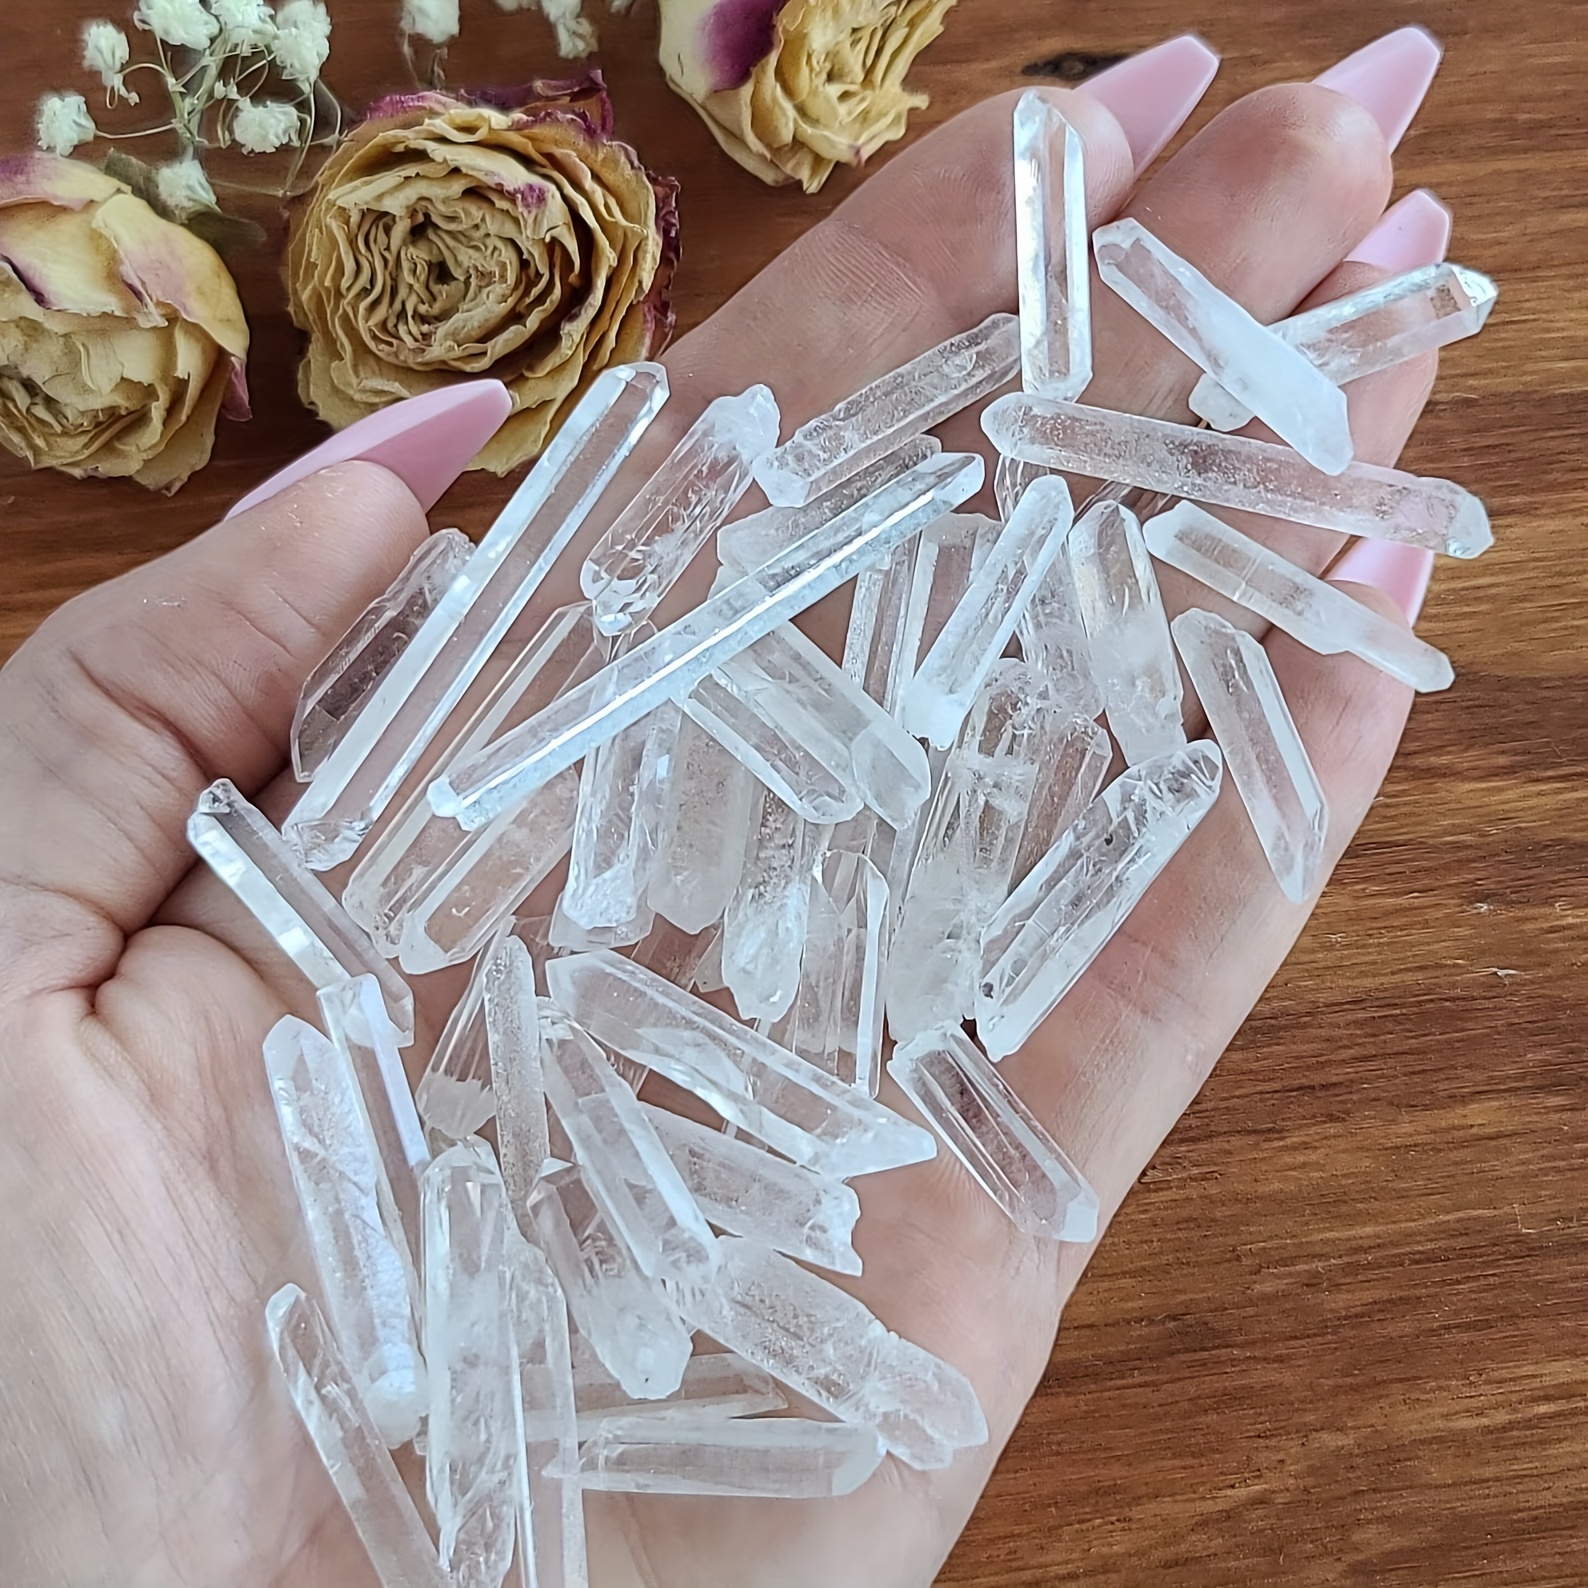 Green Crystal Quartz Points, Green Point Beads, Drilled Crystals for Crafts,  Crystals for Jewelry Crafts, Necklace Making Supplies 